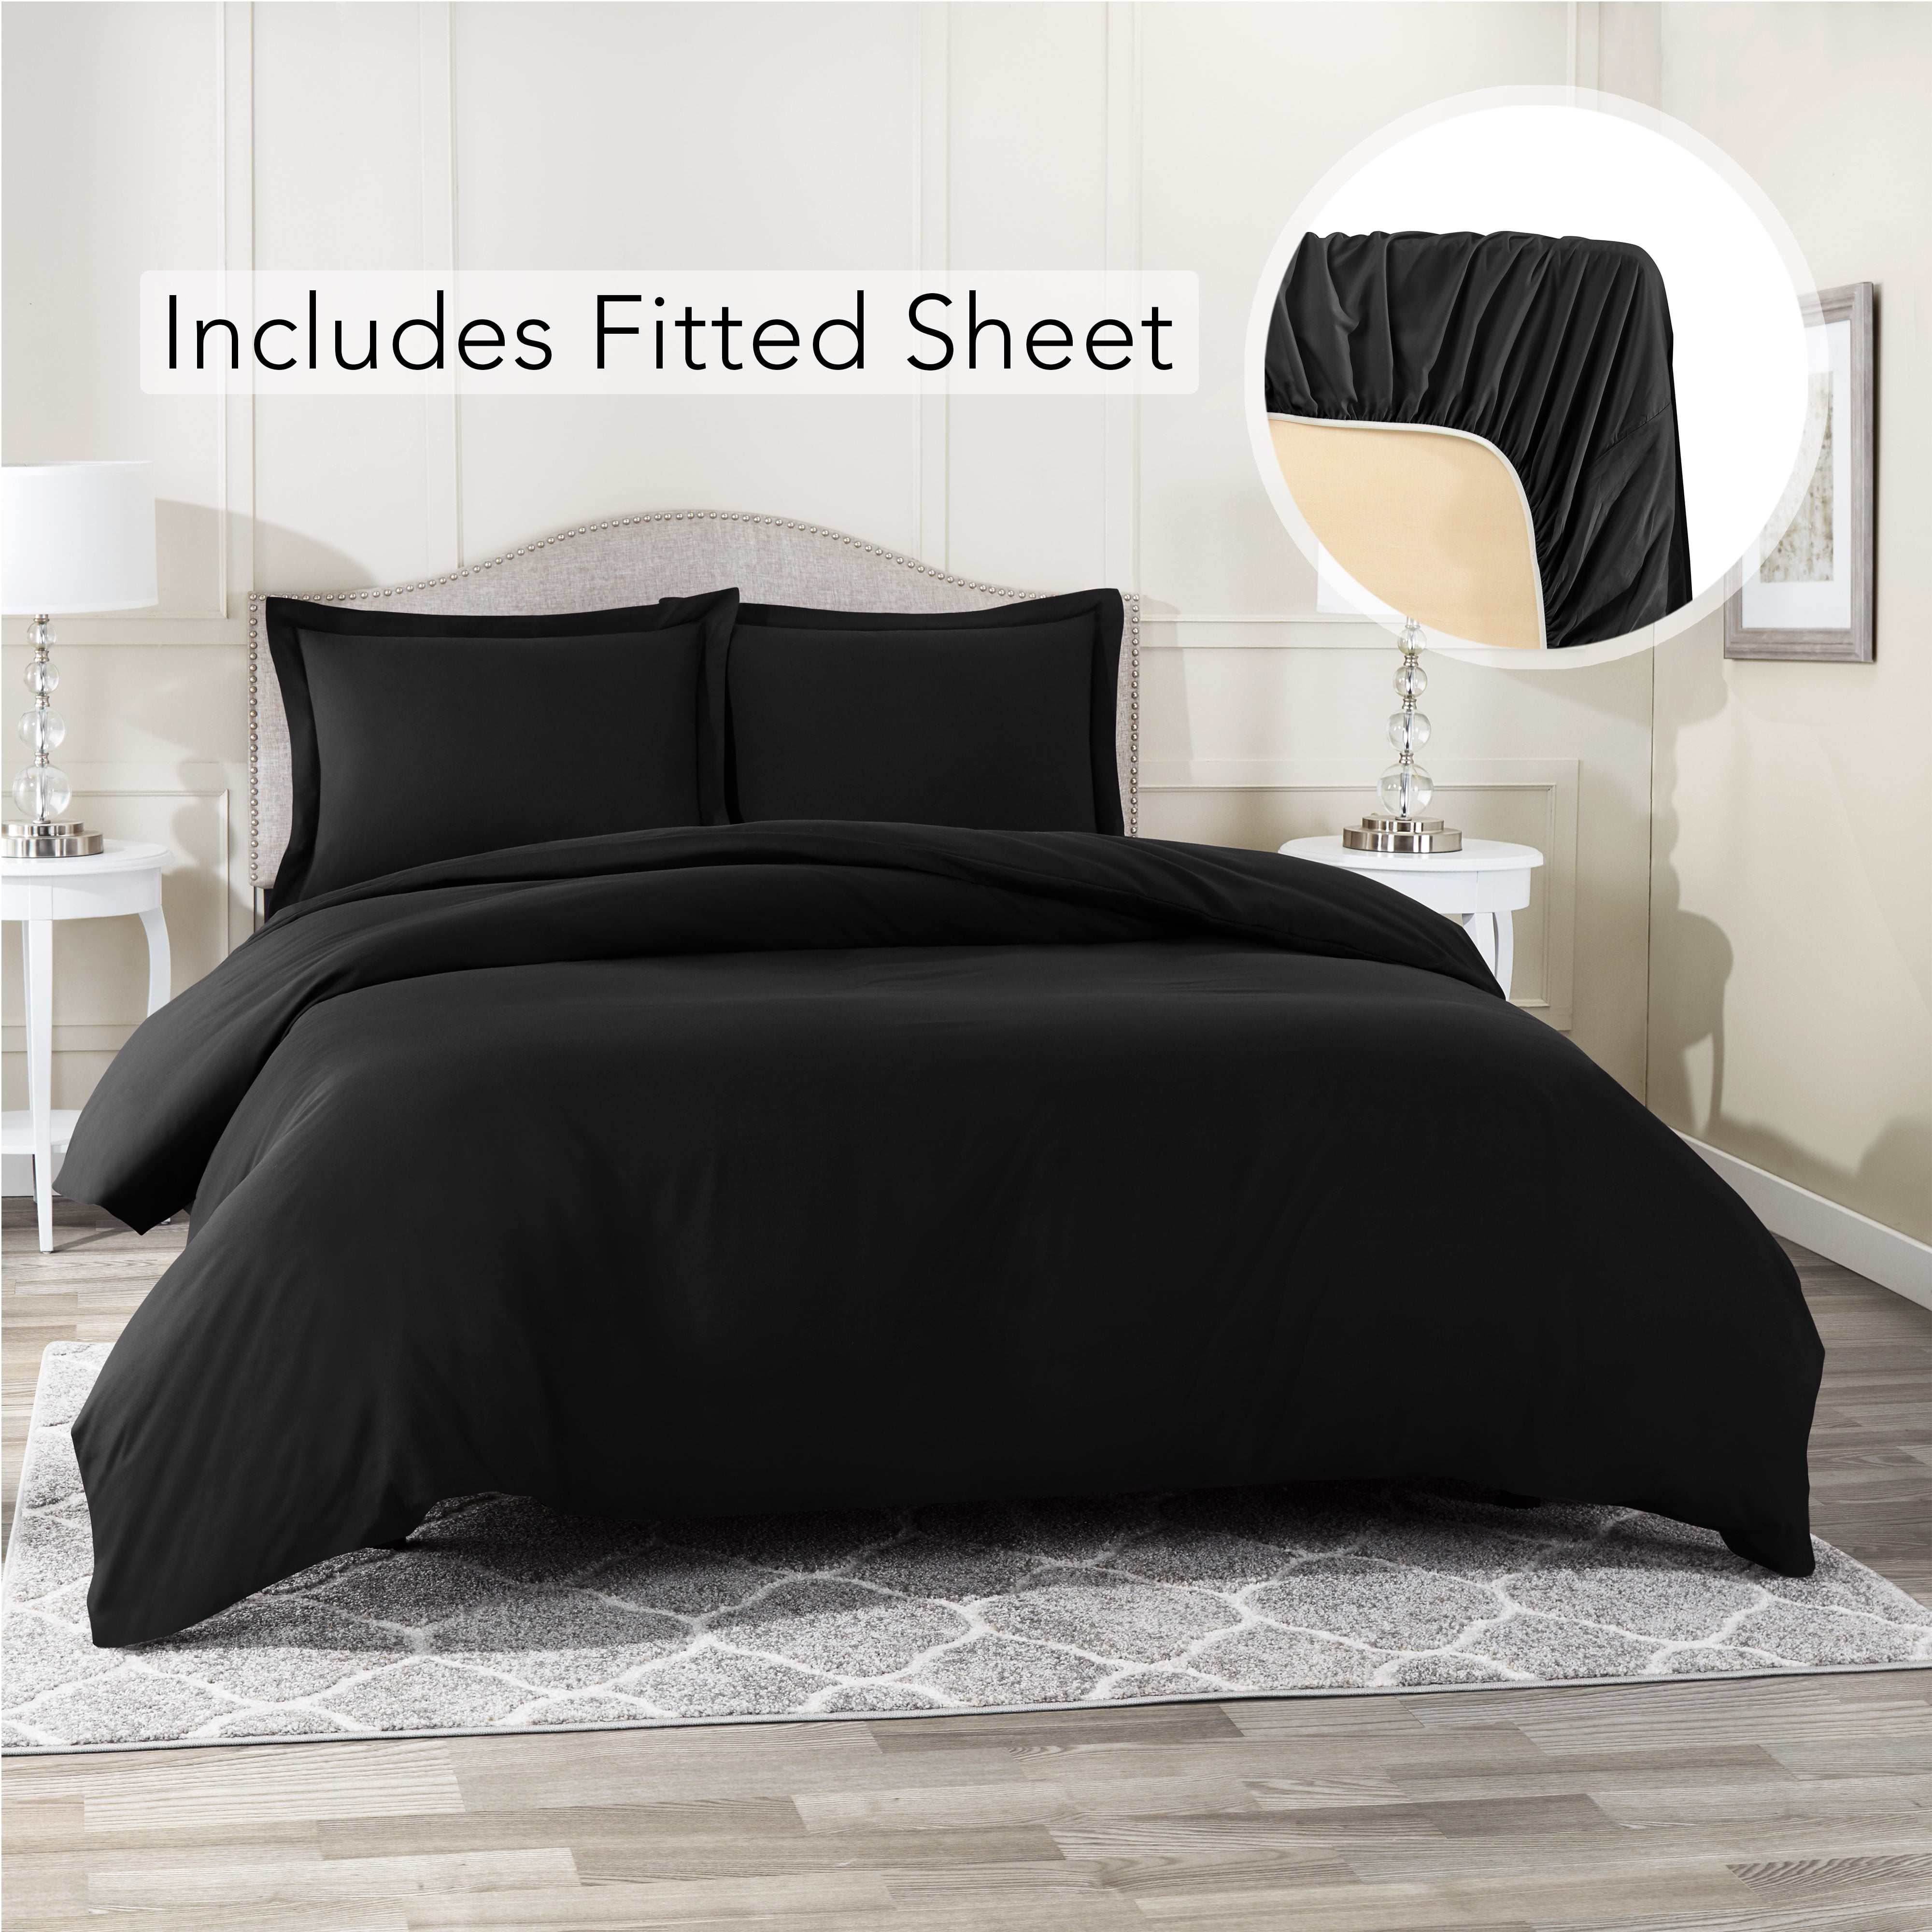 Twin XL Size Duvet Cover with 1 Fitted Sheet and 1 Pillow sham, Button ...